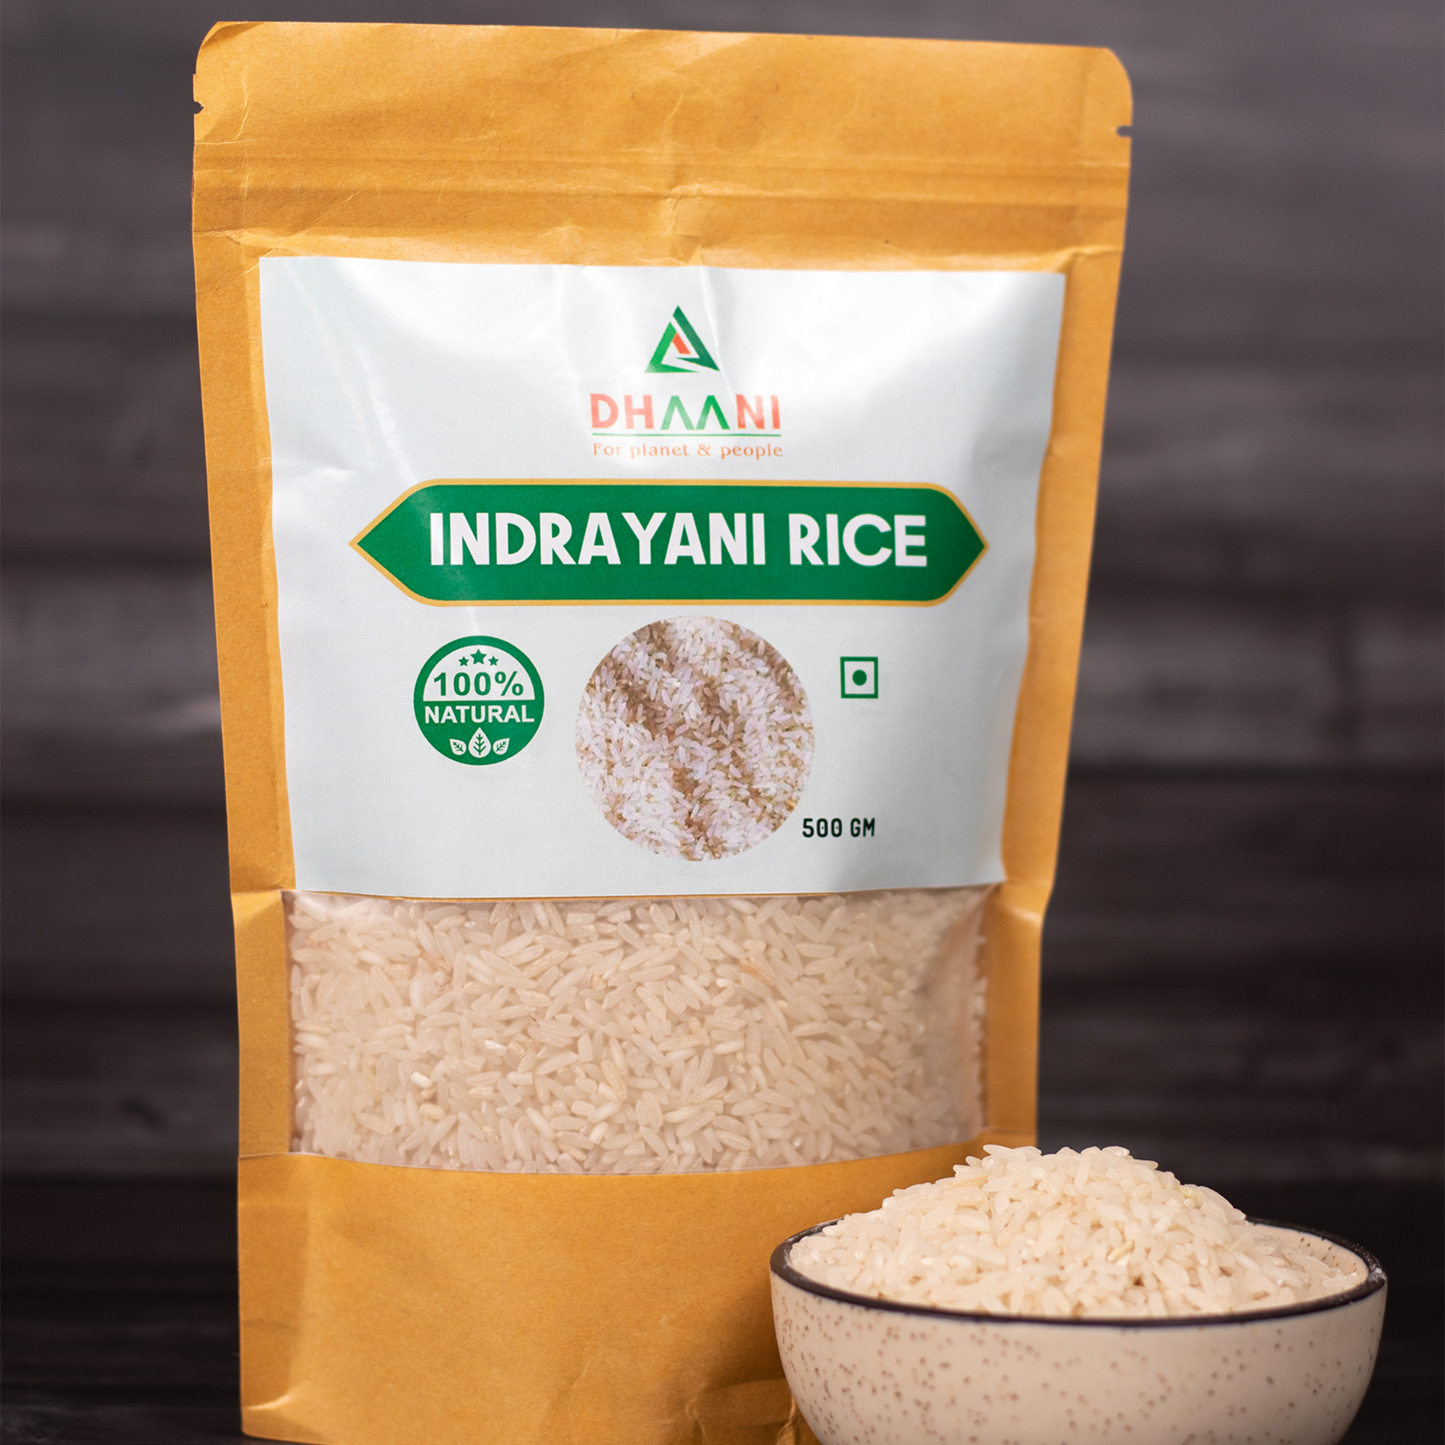 Bringing Home Indrayani Rice: A Taste of Tradition in the USA